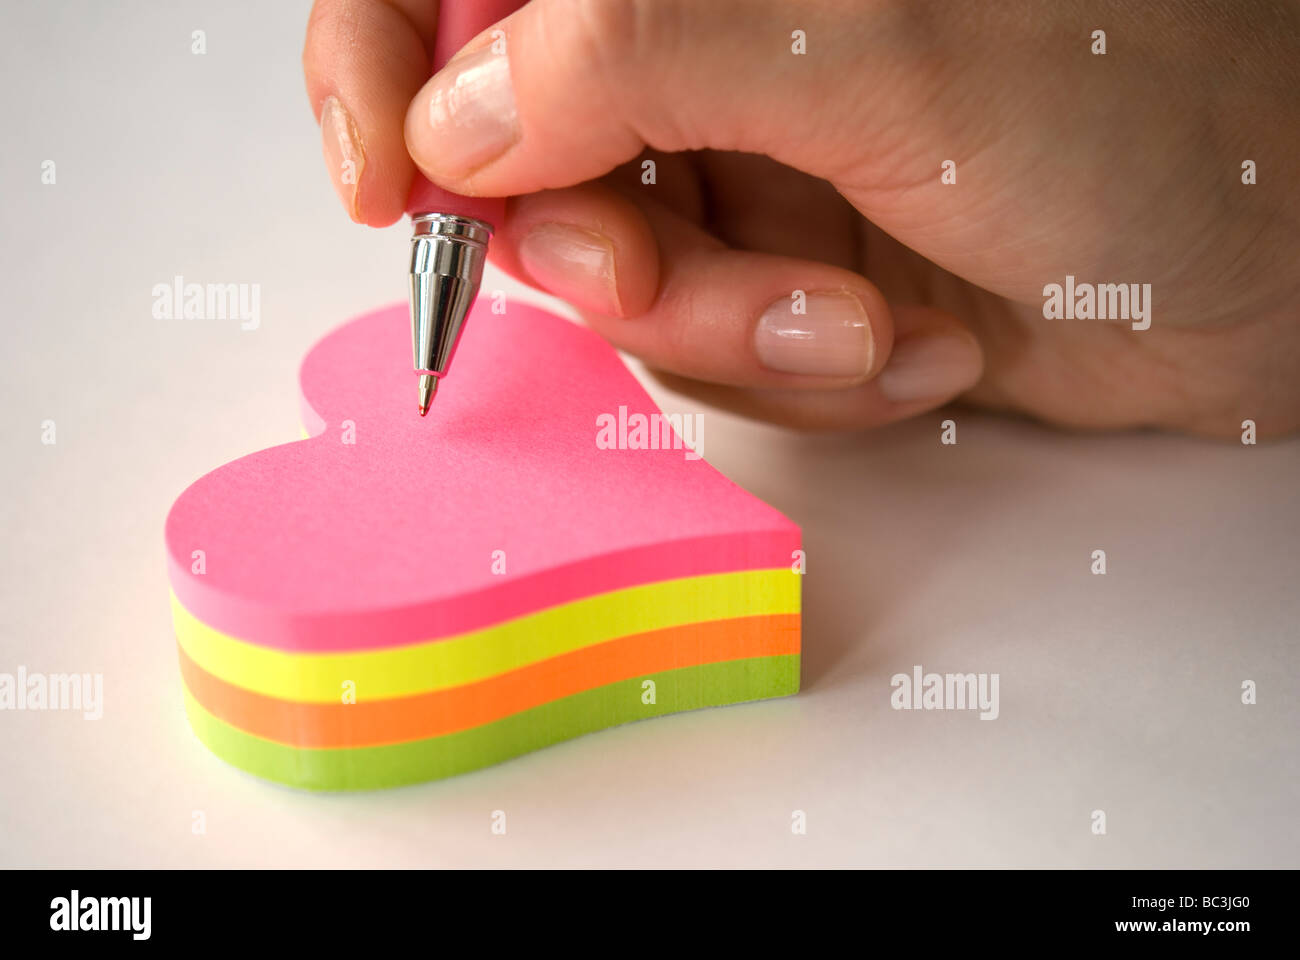 Hand holding pen writing on heart shaped colorful sticky notes Stock Photo